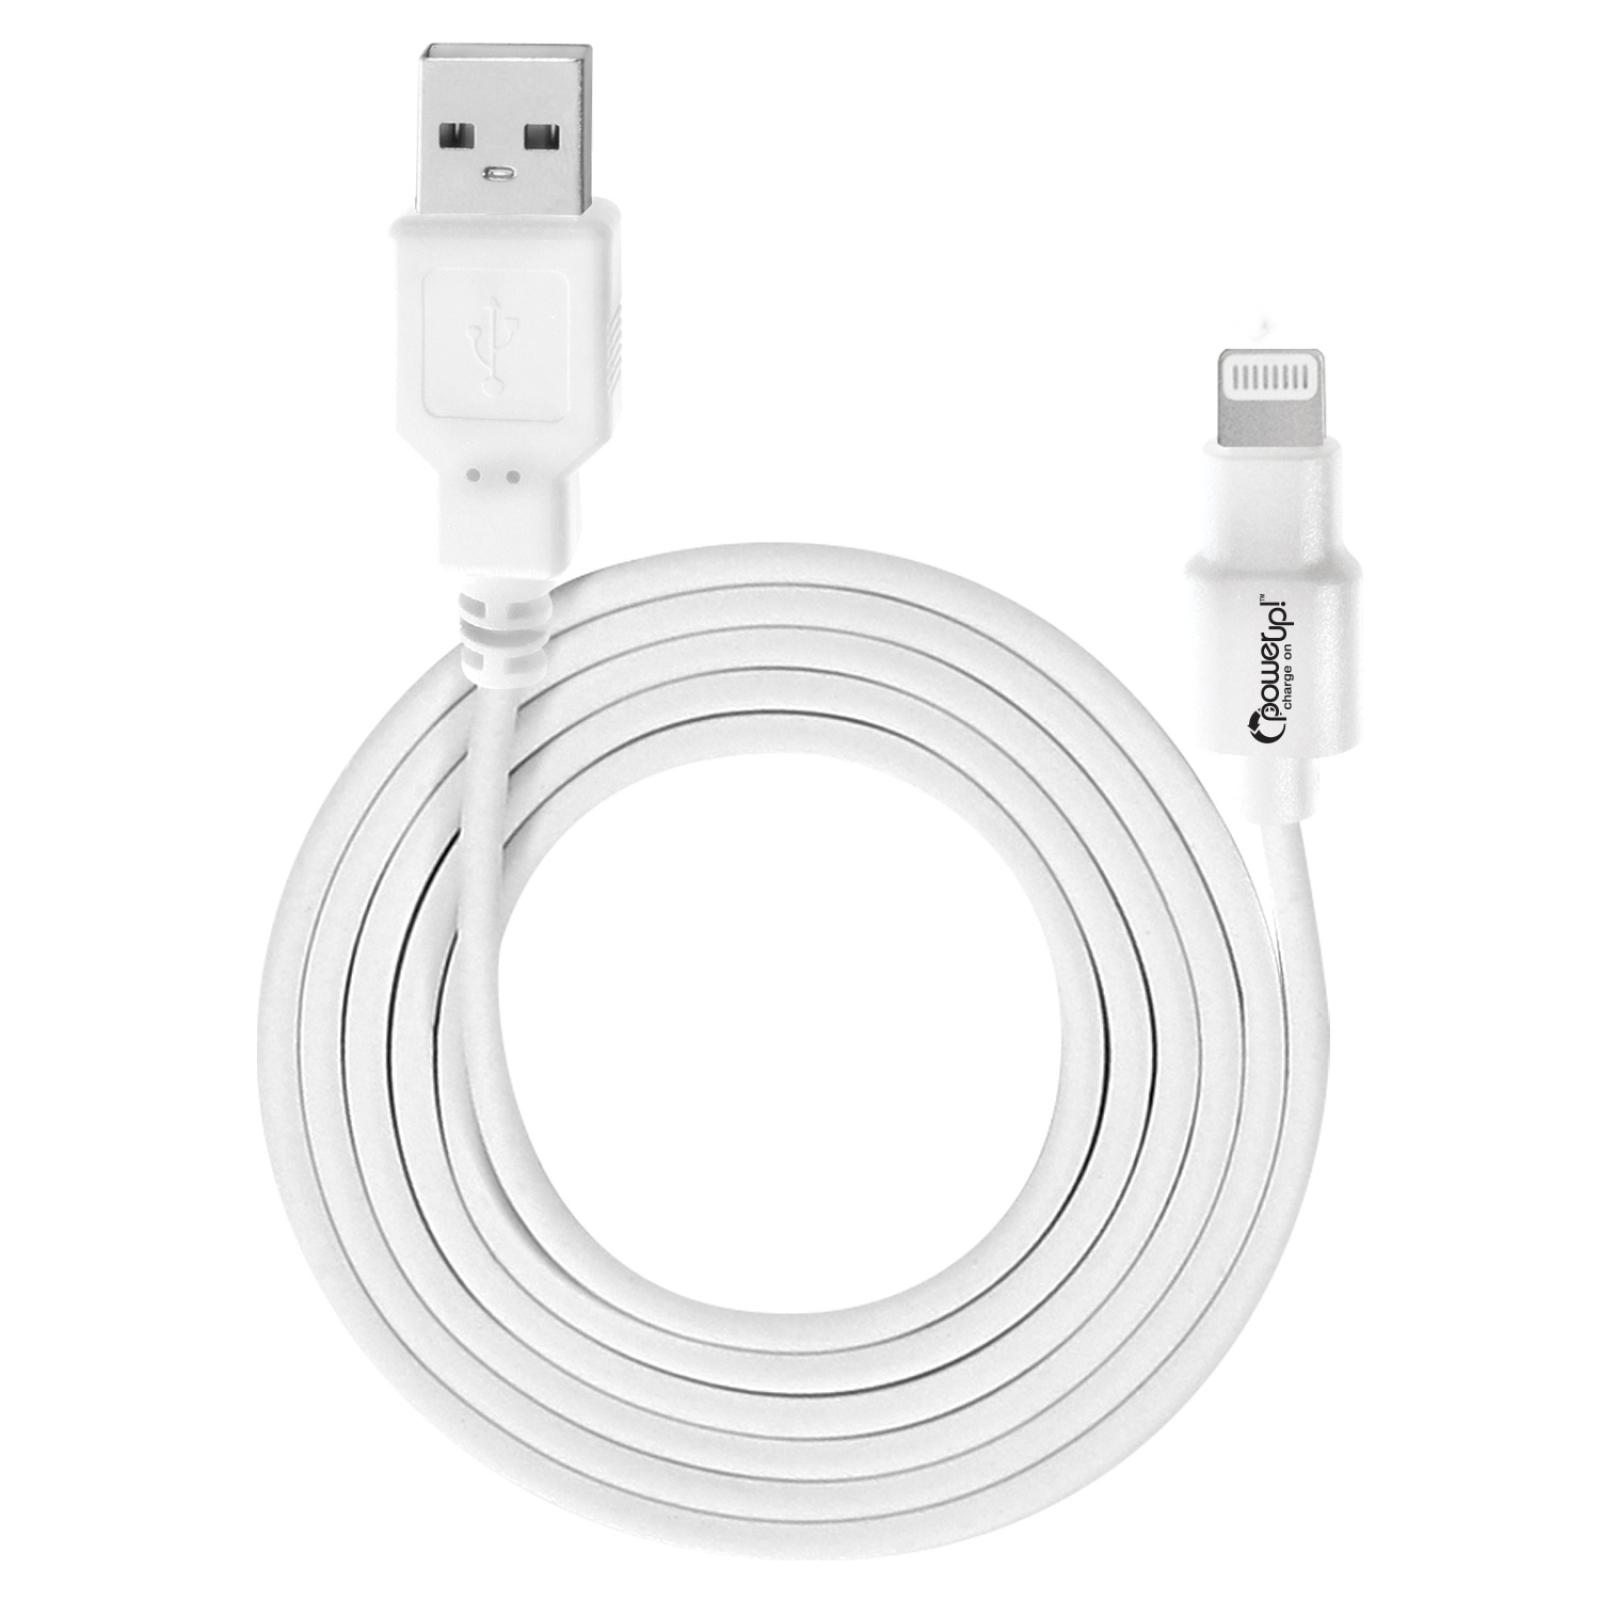 PowerUp! Charge On™ MFI Apple Lightning™ USB Cable